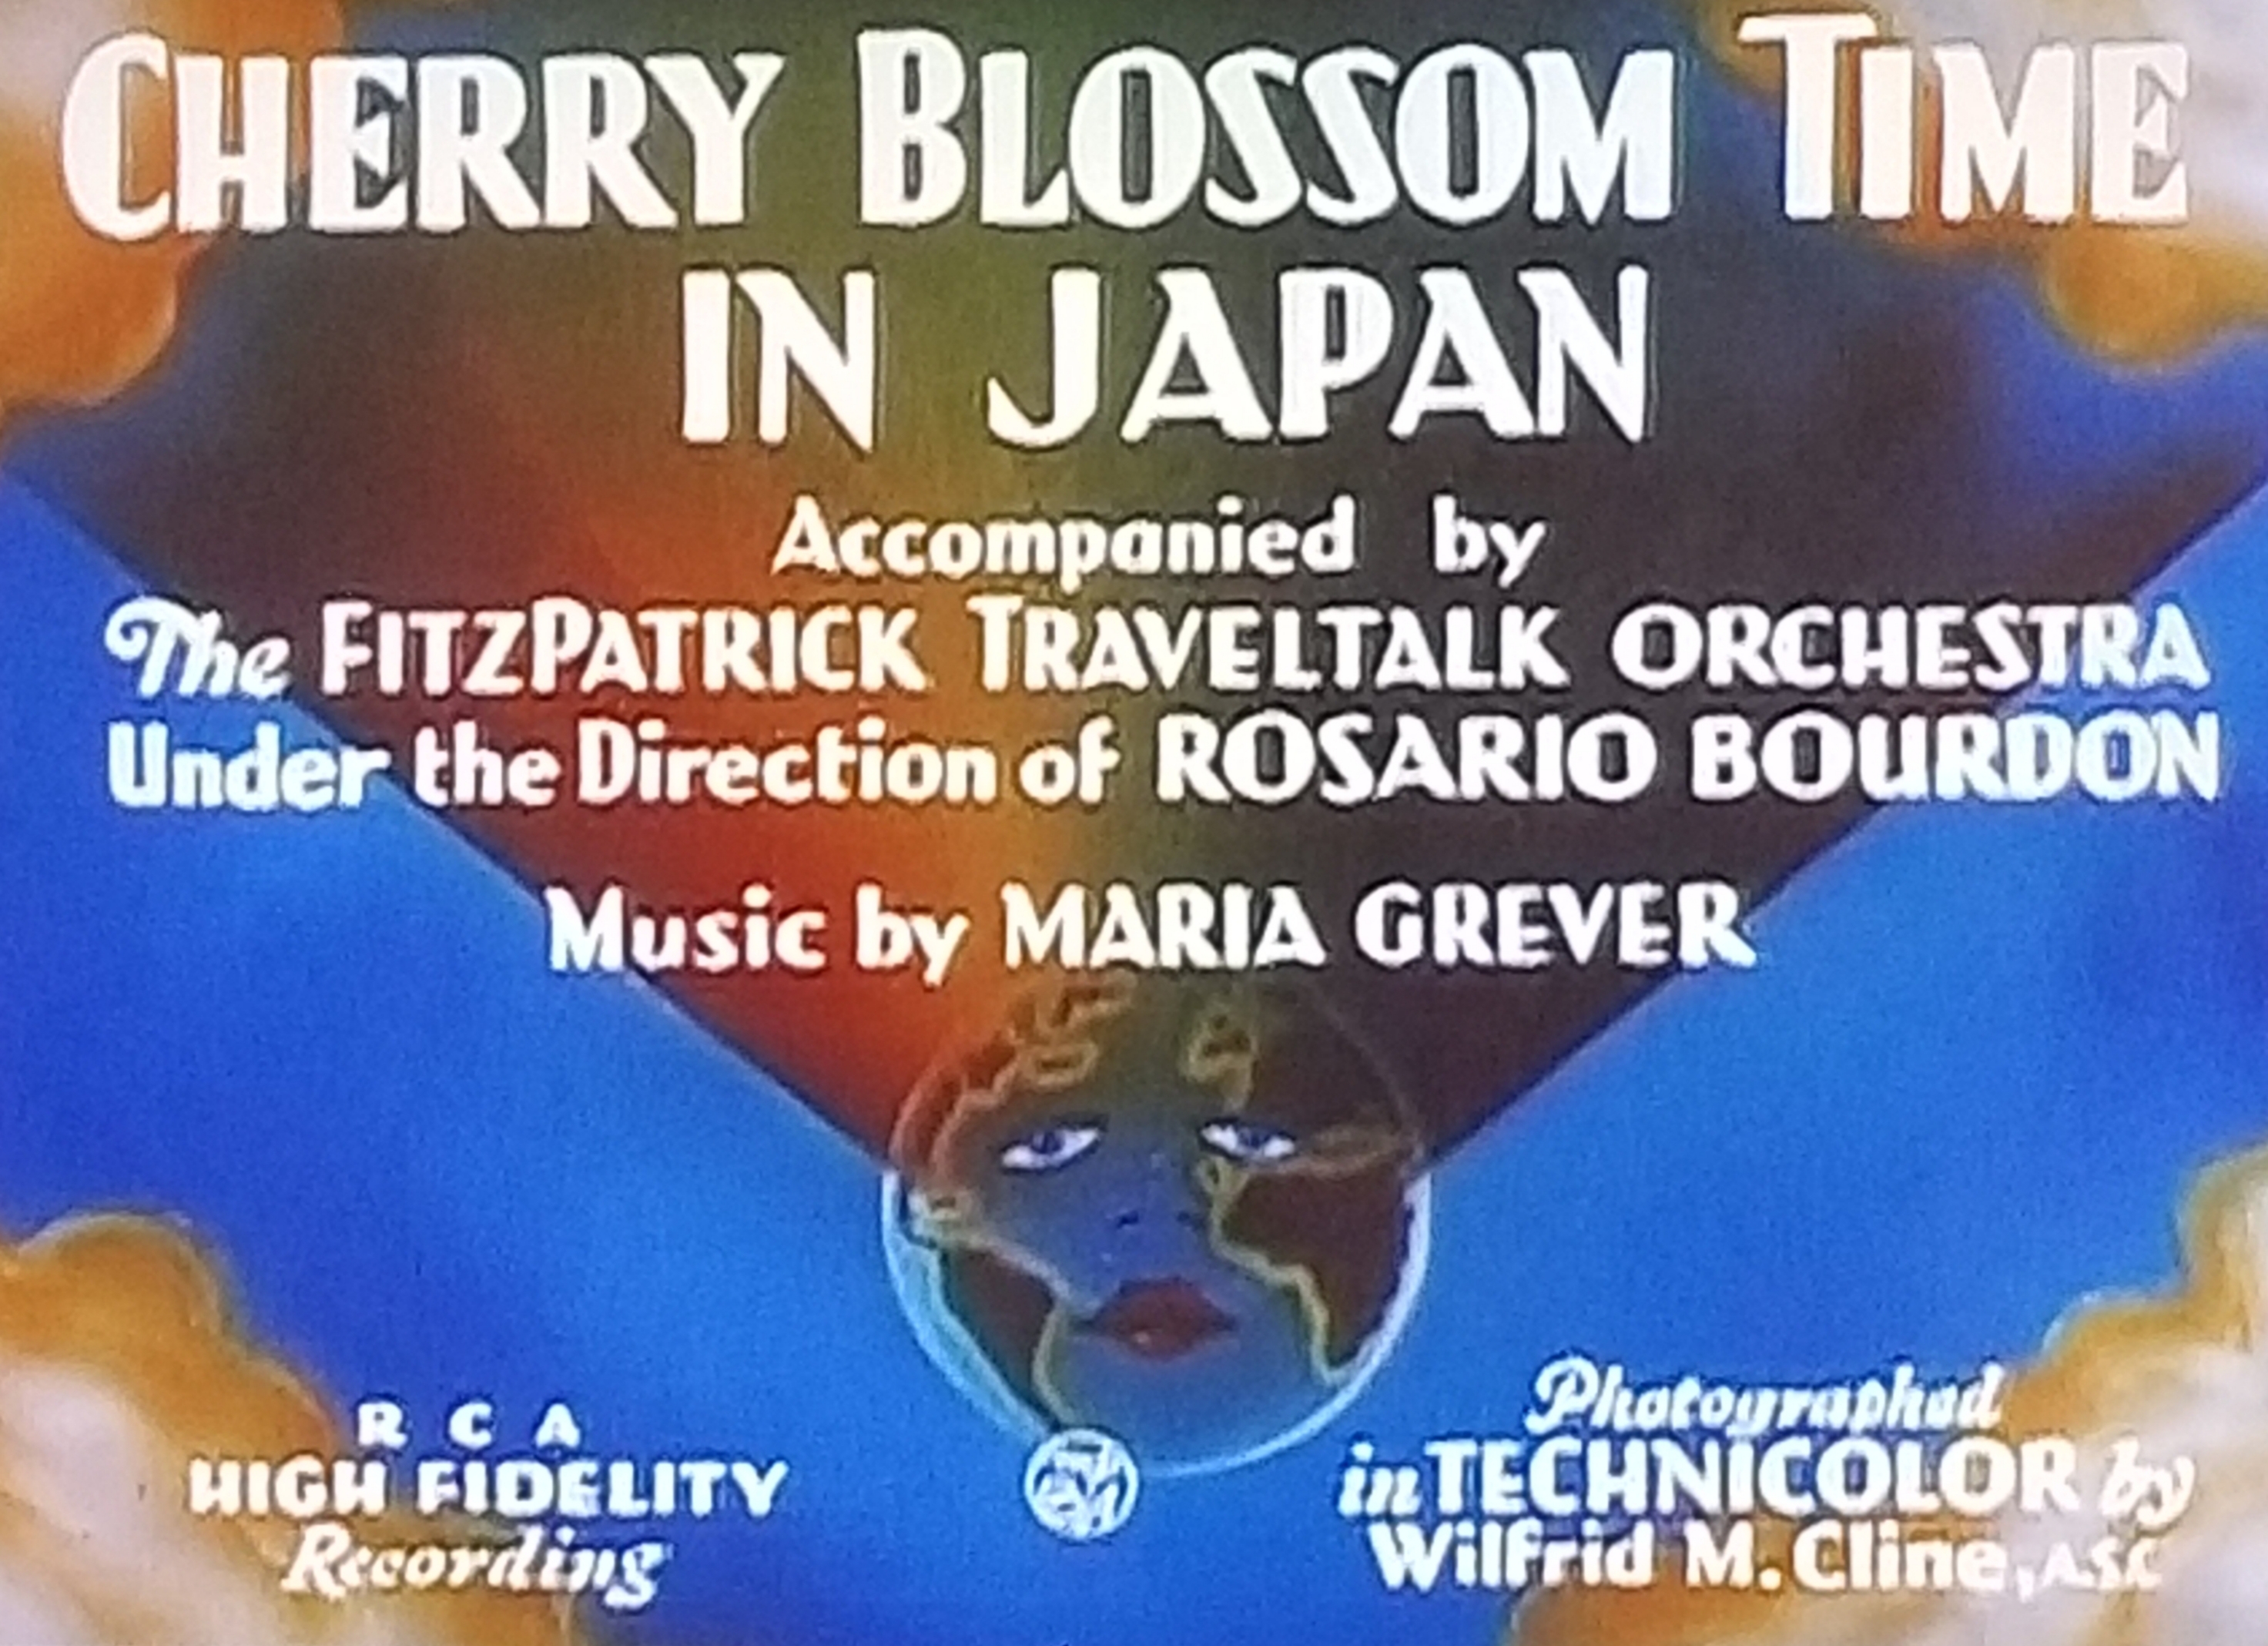 Cherry Blossom Time in Japan (1936) Screenshot 1 